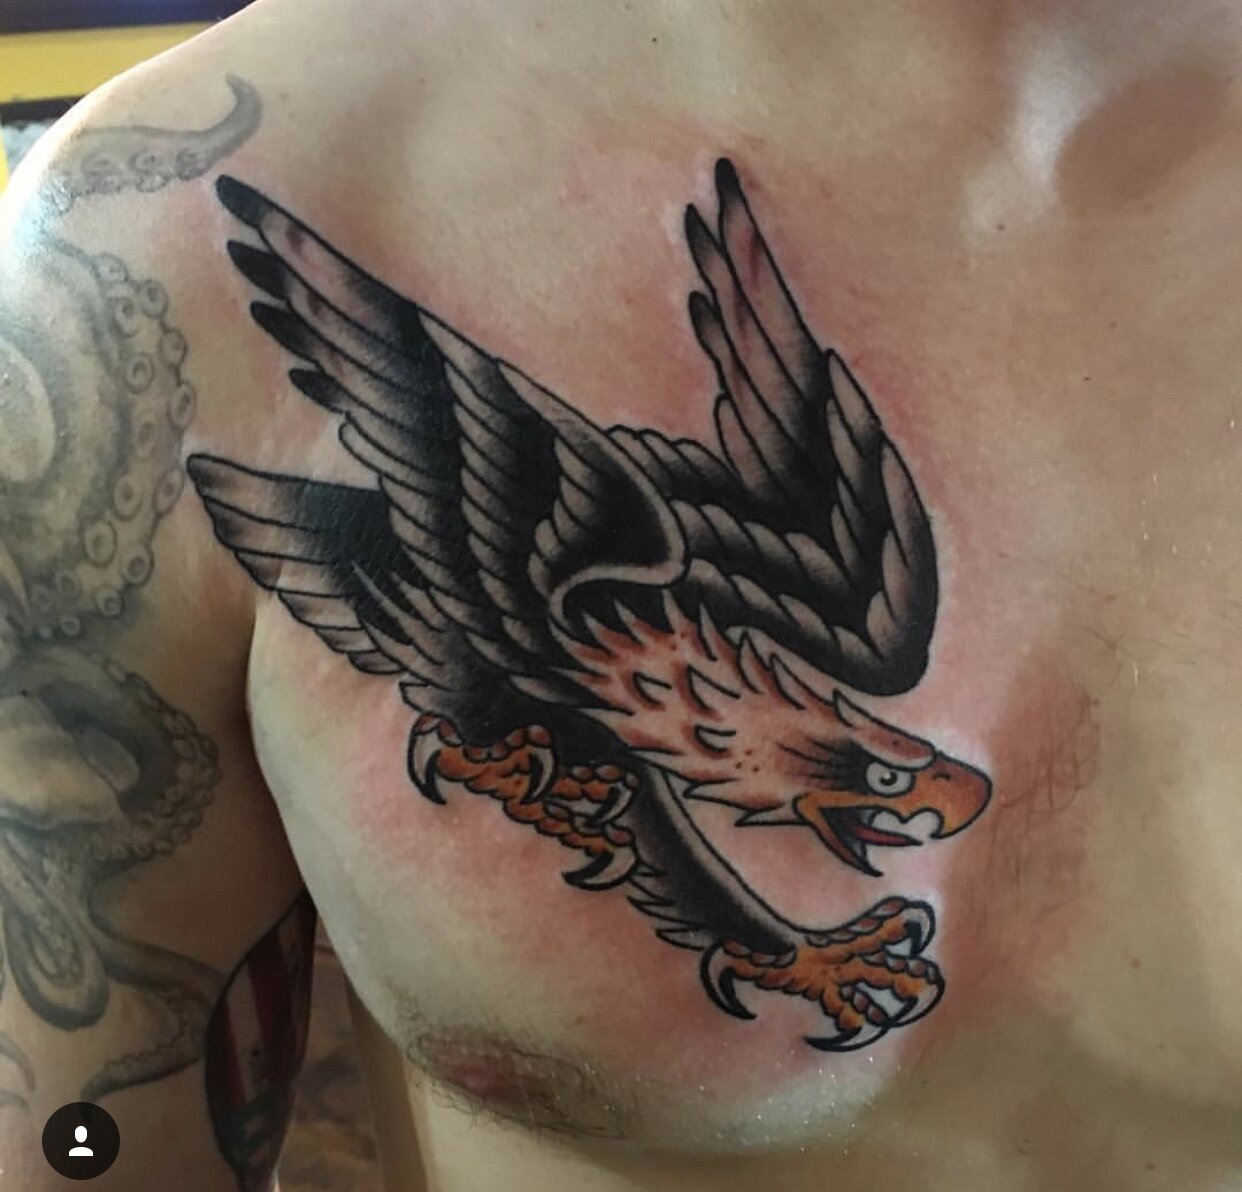 Traditional American bald eagle tattoo by Andrew Patch at Southern Star Tattoo in Atlanta, Georgia.